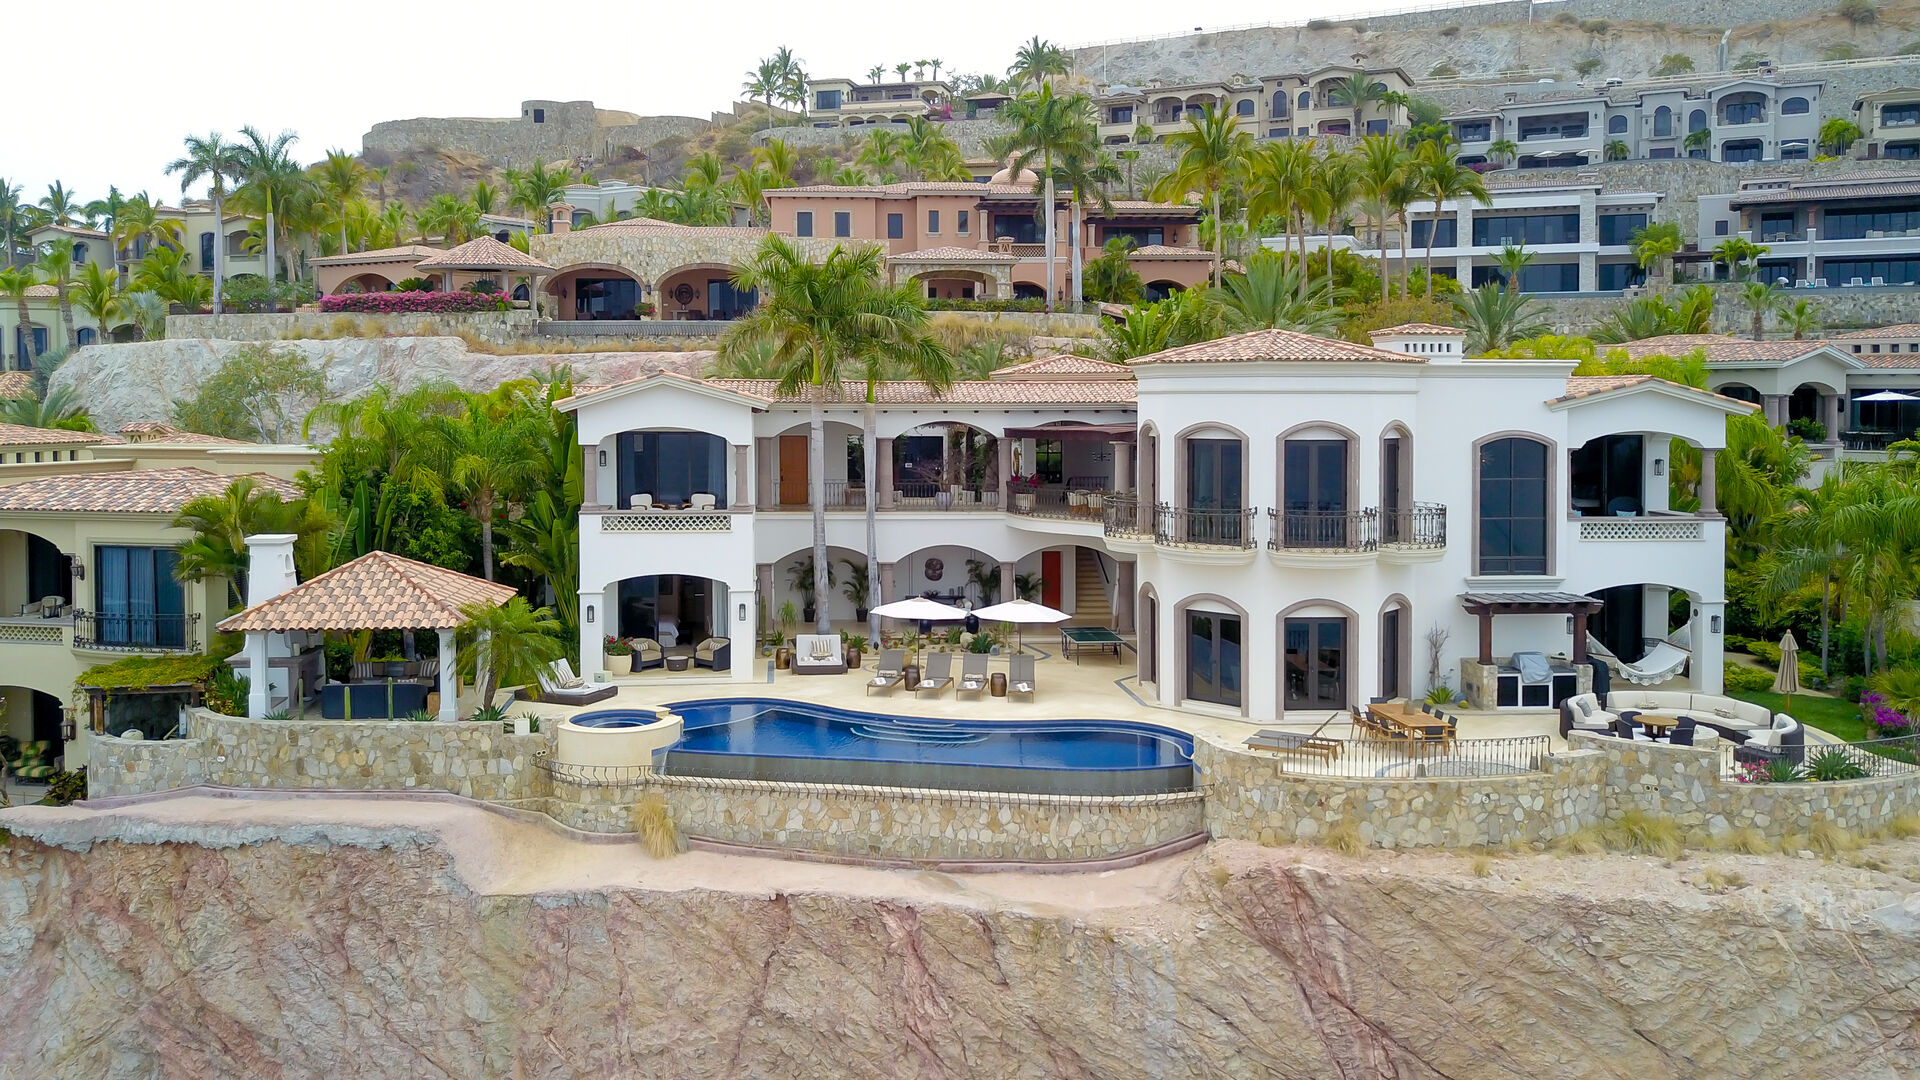 The back view of the Hacienda 502 in Los Cabos